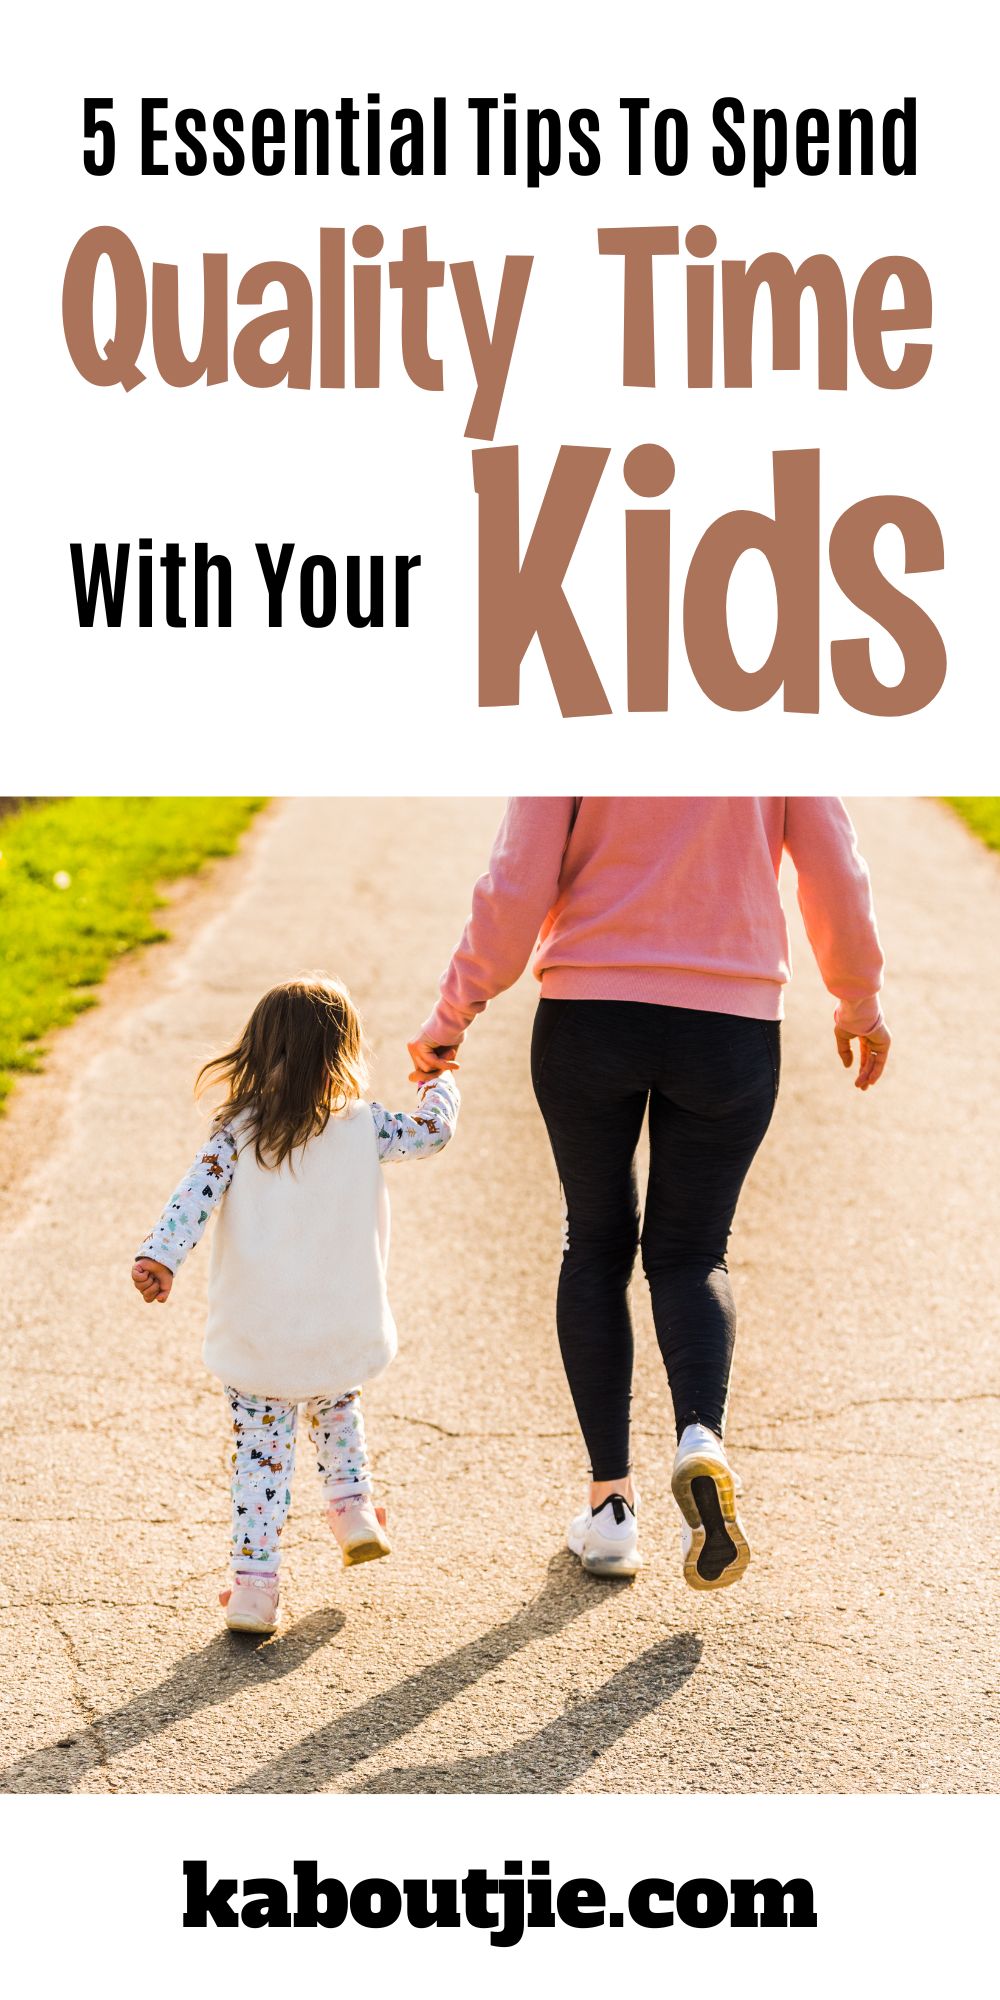 5 Essential Tips To Spend Quality Time With Your Kids